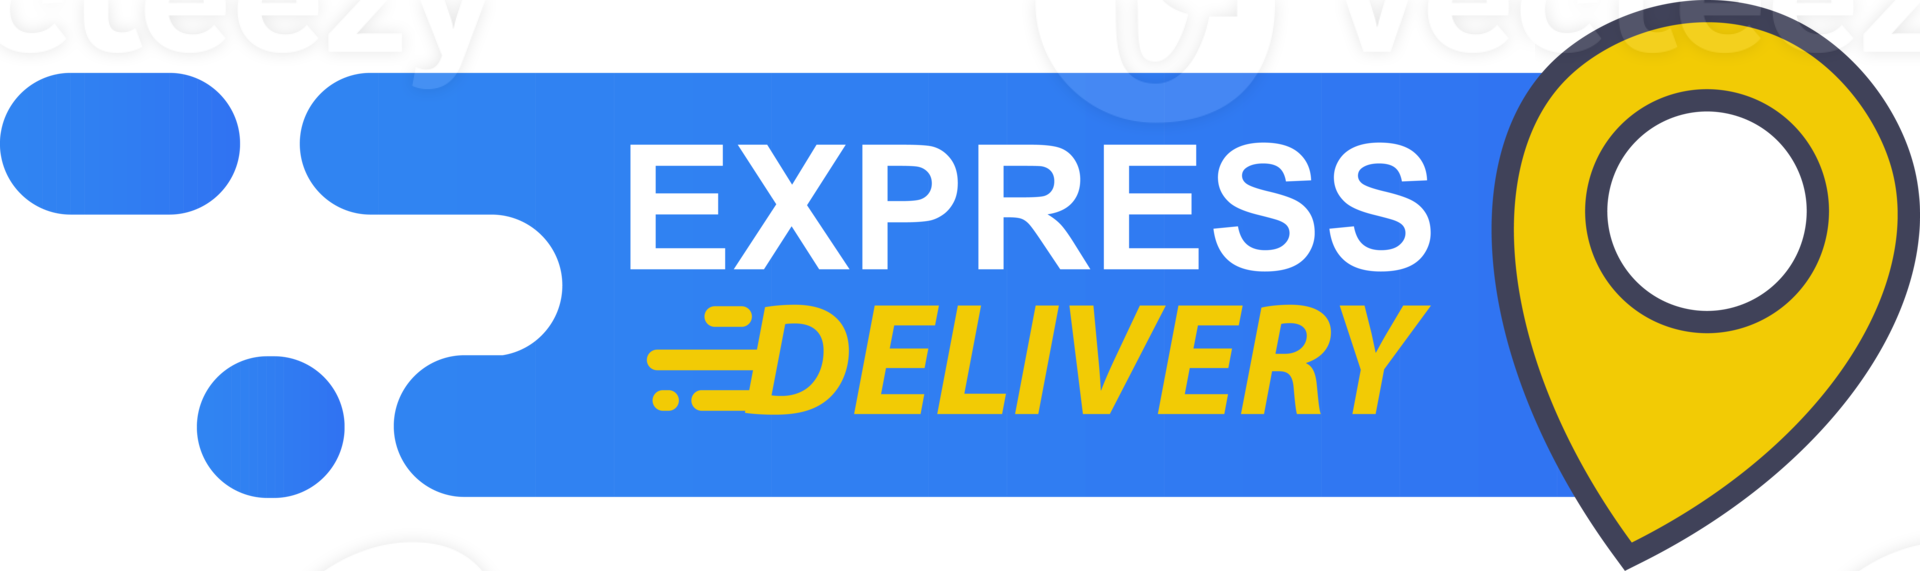 Express delivery with location pin icon concept for service, order, fast, free and worldwide shipping. png